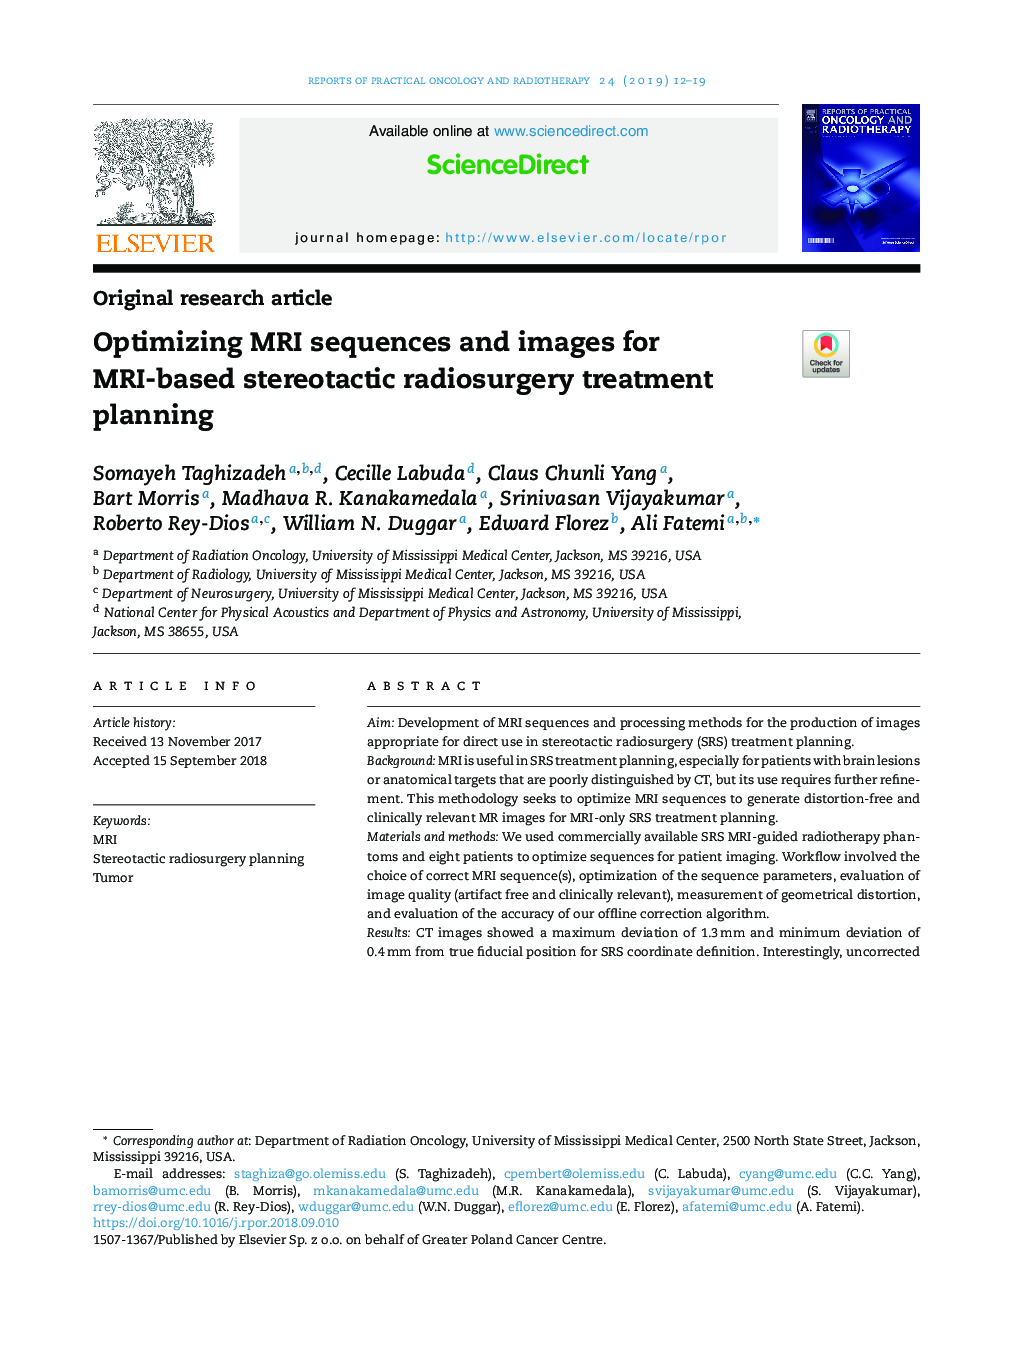 Optimizing MRI sequences and images for MRI-based stereotactic radiosurgery treatment planning